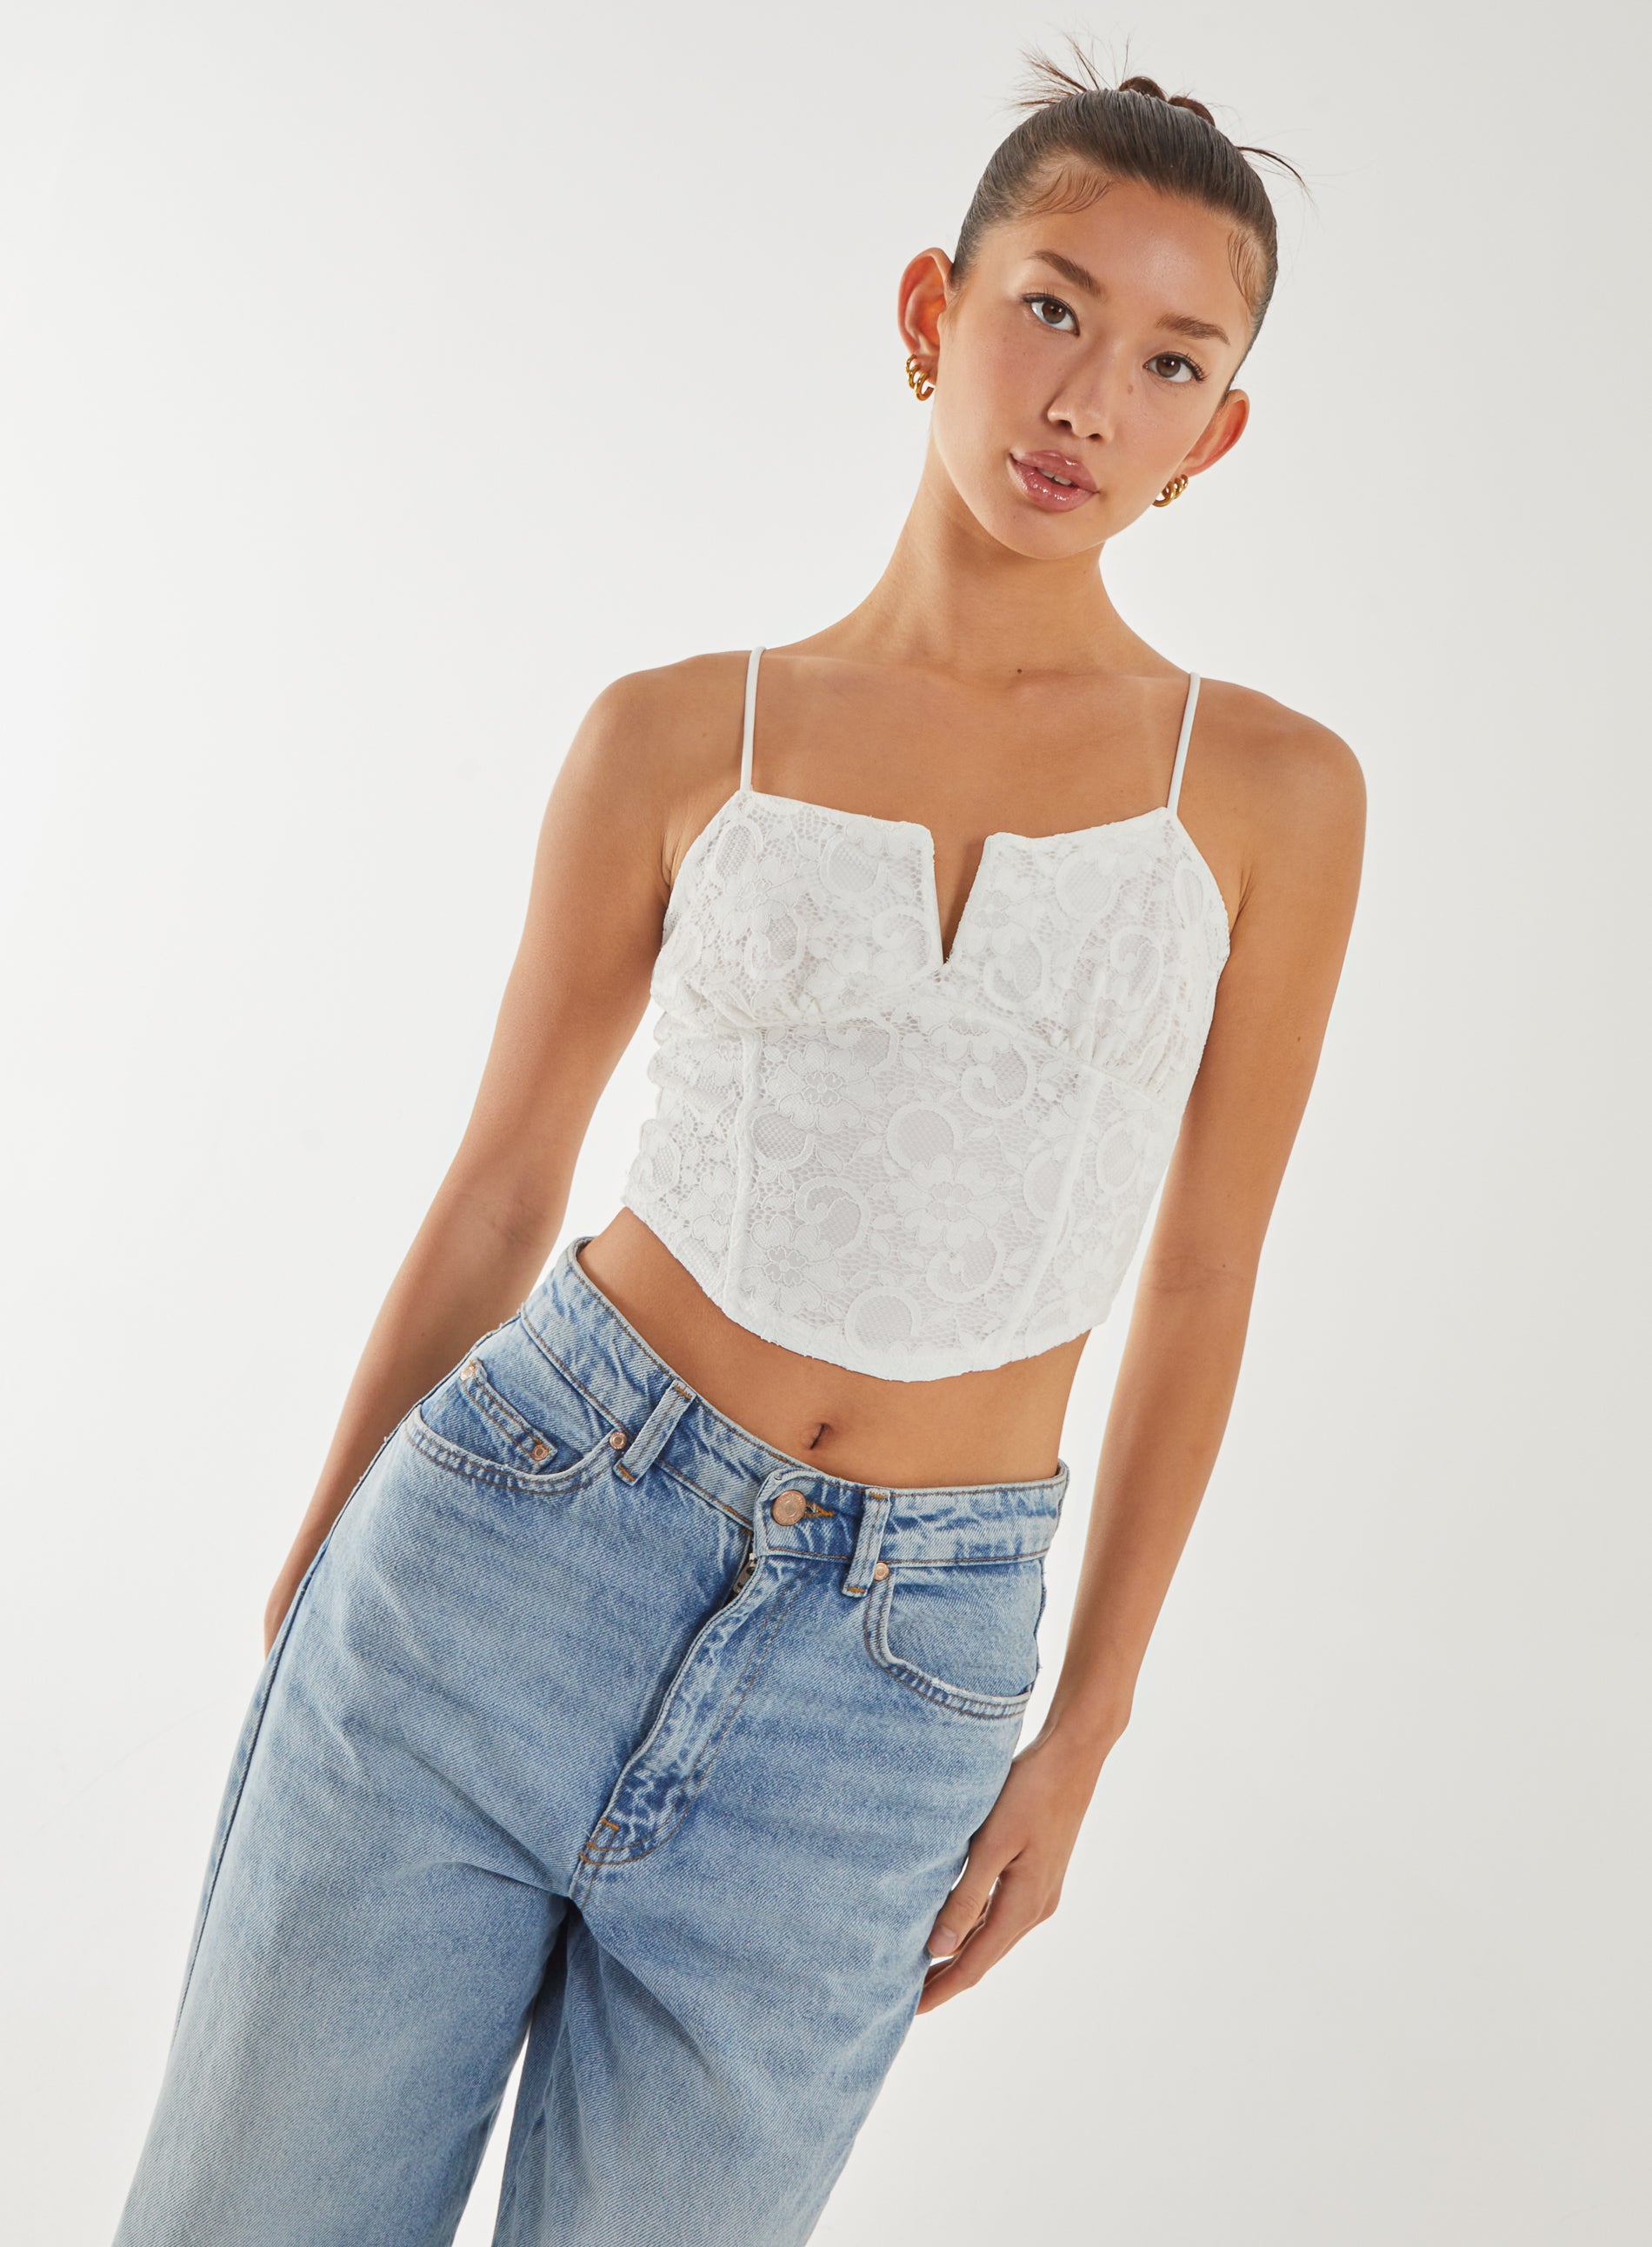 V-Detail Lace Strappy Top  - L  - IVORY product